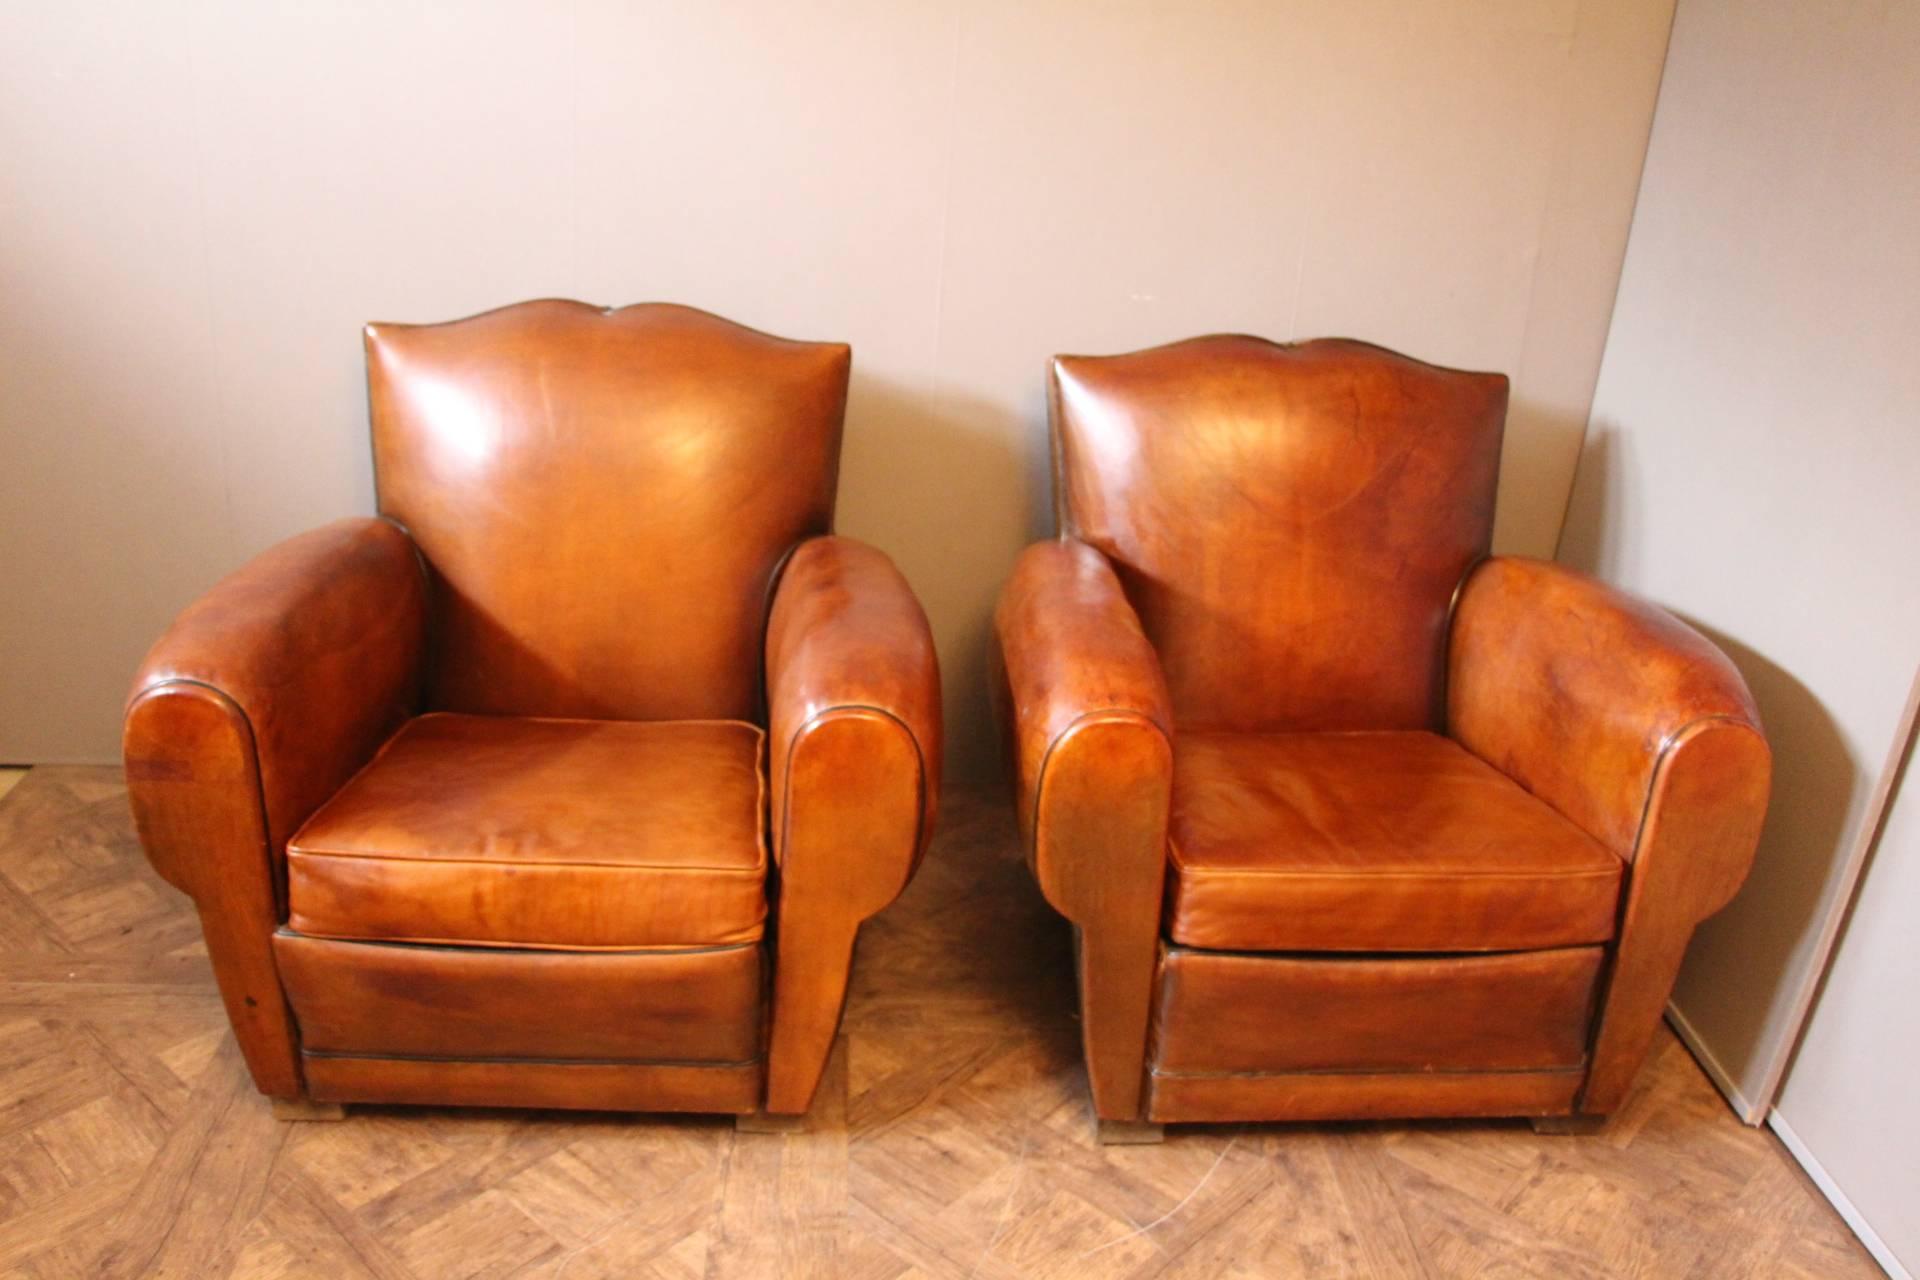 A beautiful pair of Art Deco French chairs in a rich brown patina leather.
Original leather, original upholstery which is worn but not worn out.
Classic Mustache style back and two separate seat cushions.